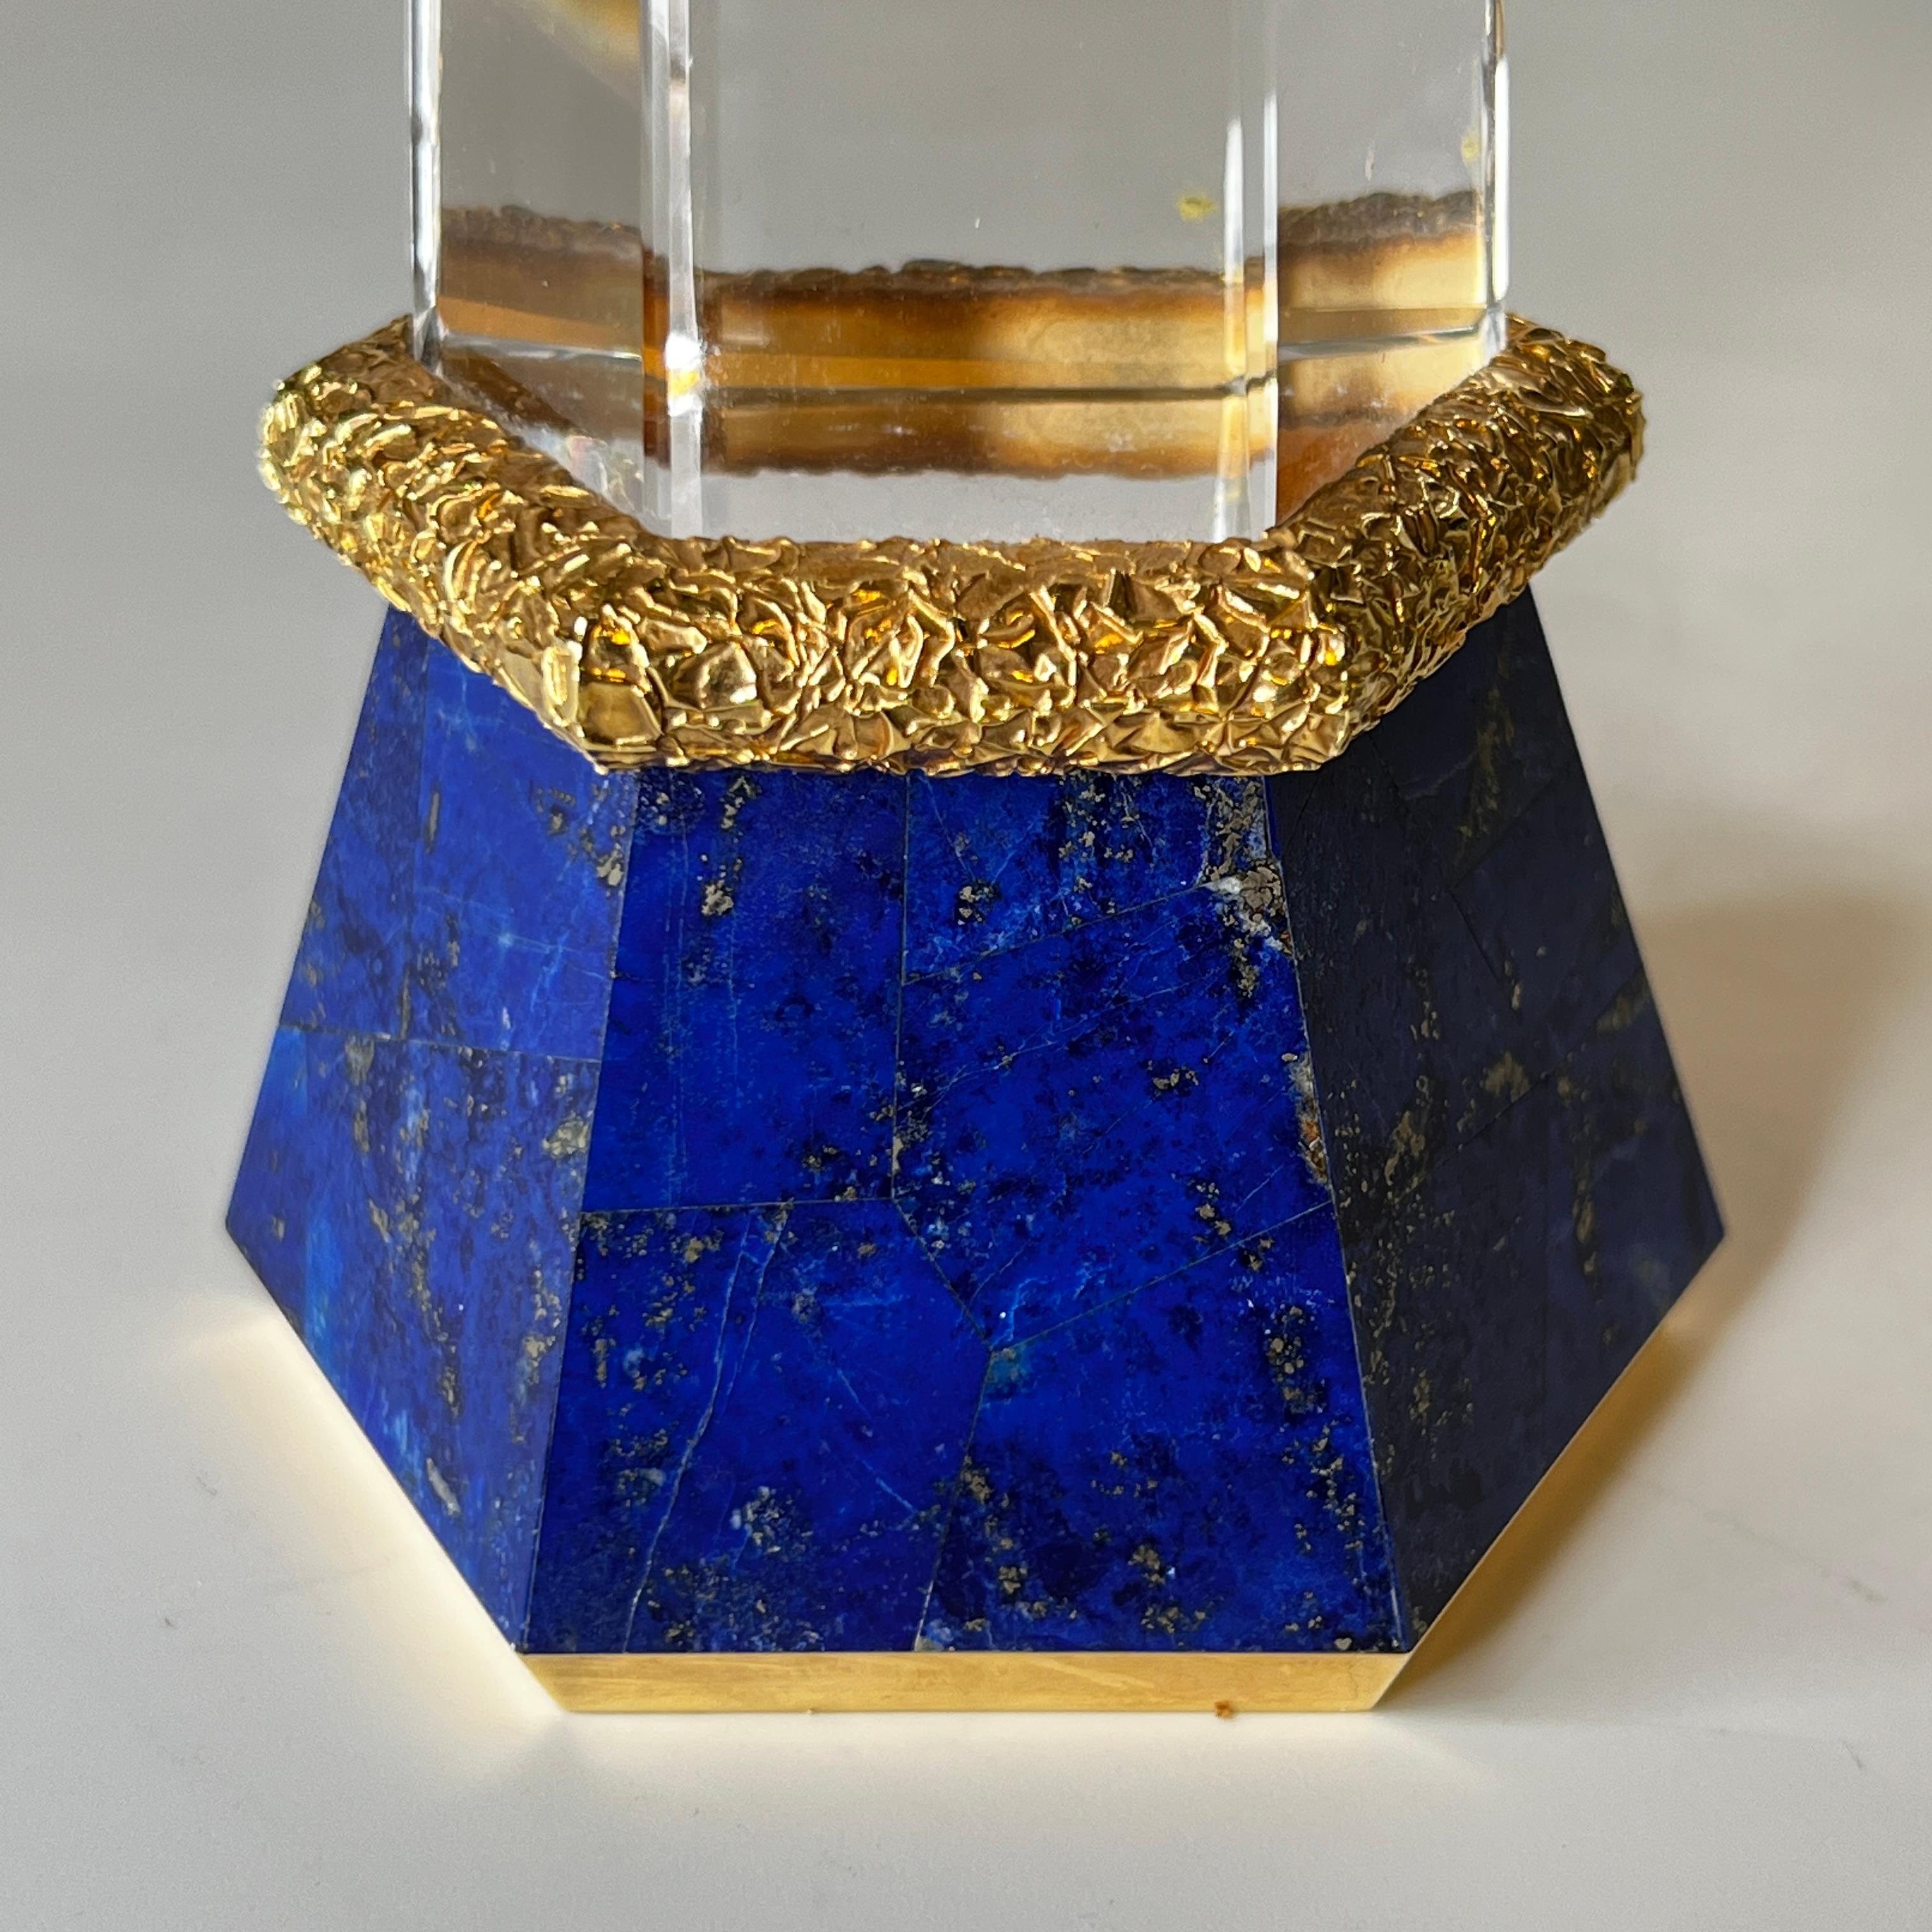 20th Century Rock Crystal and Lapis Lazuli Candlesticks For Sale